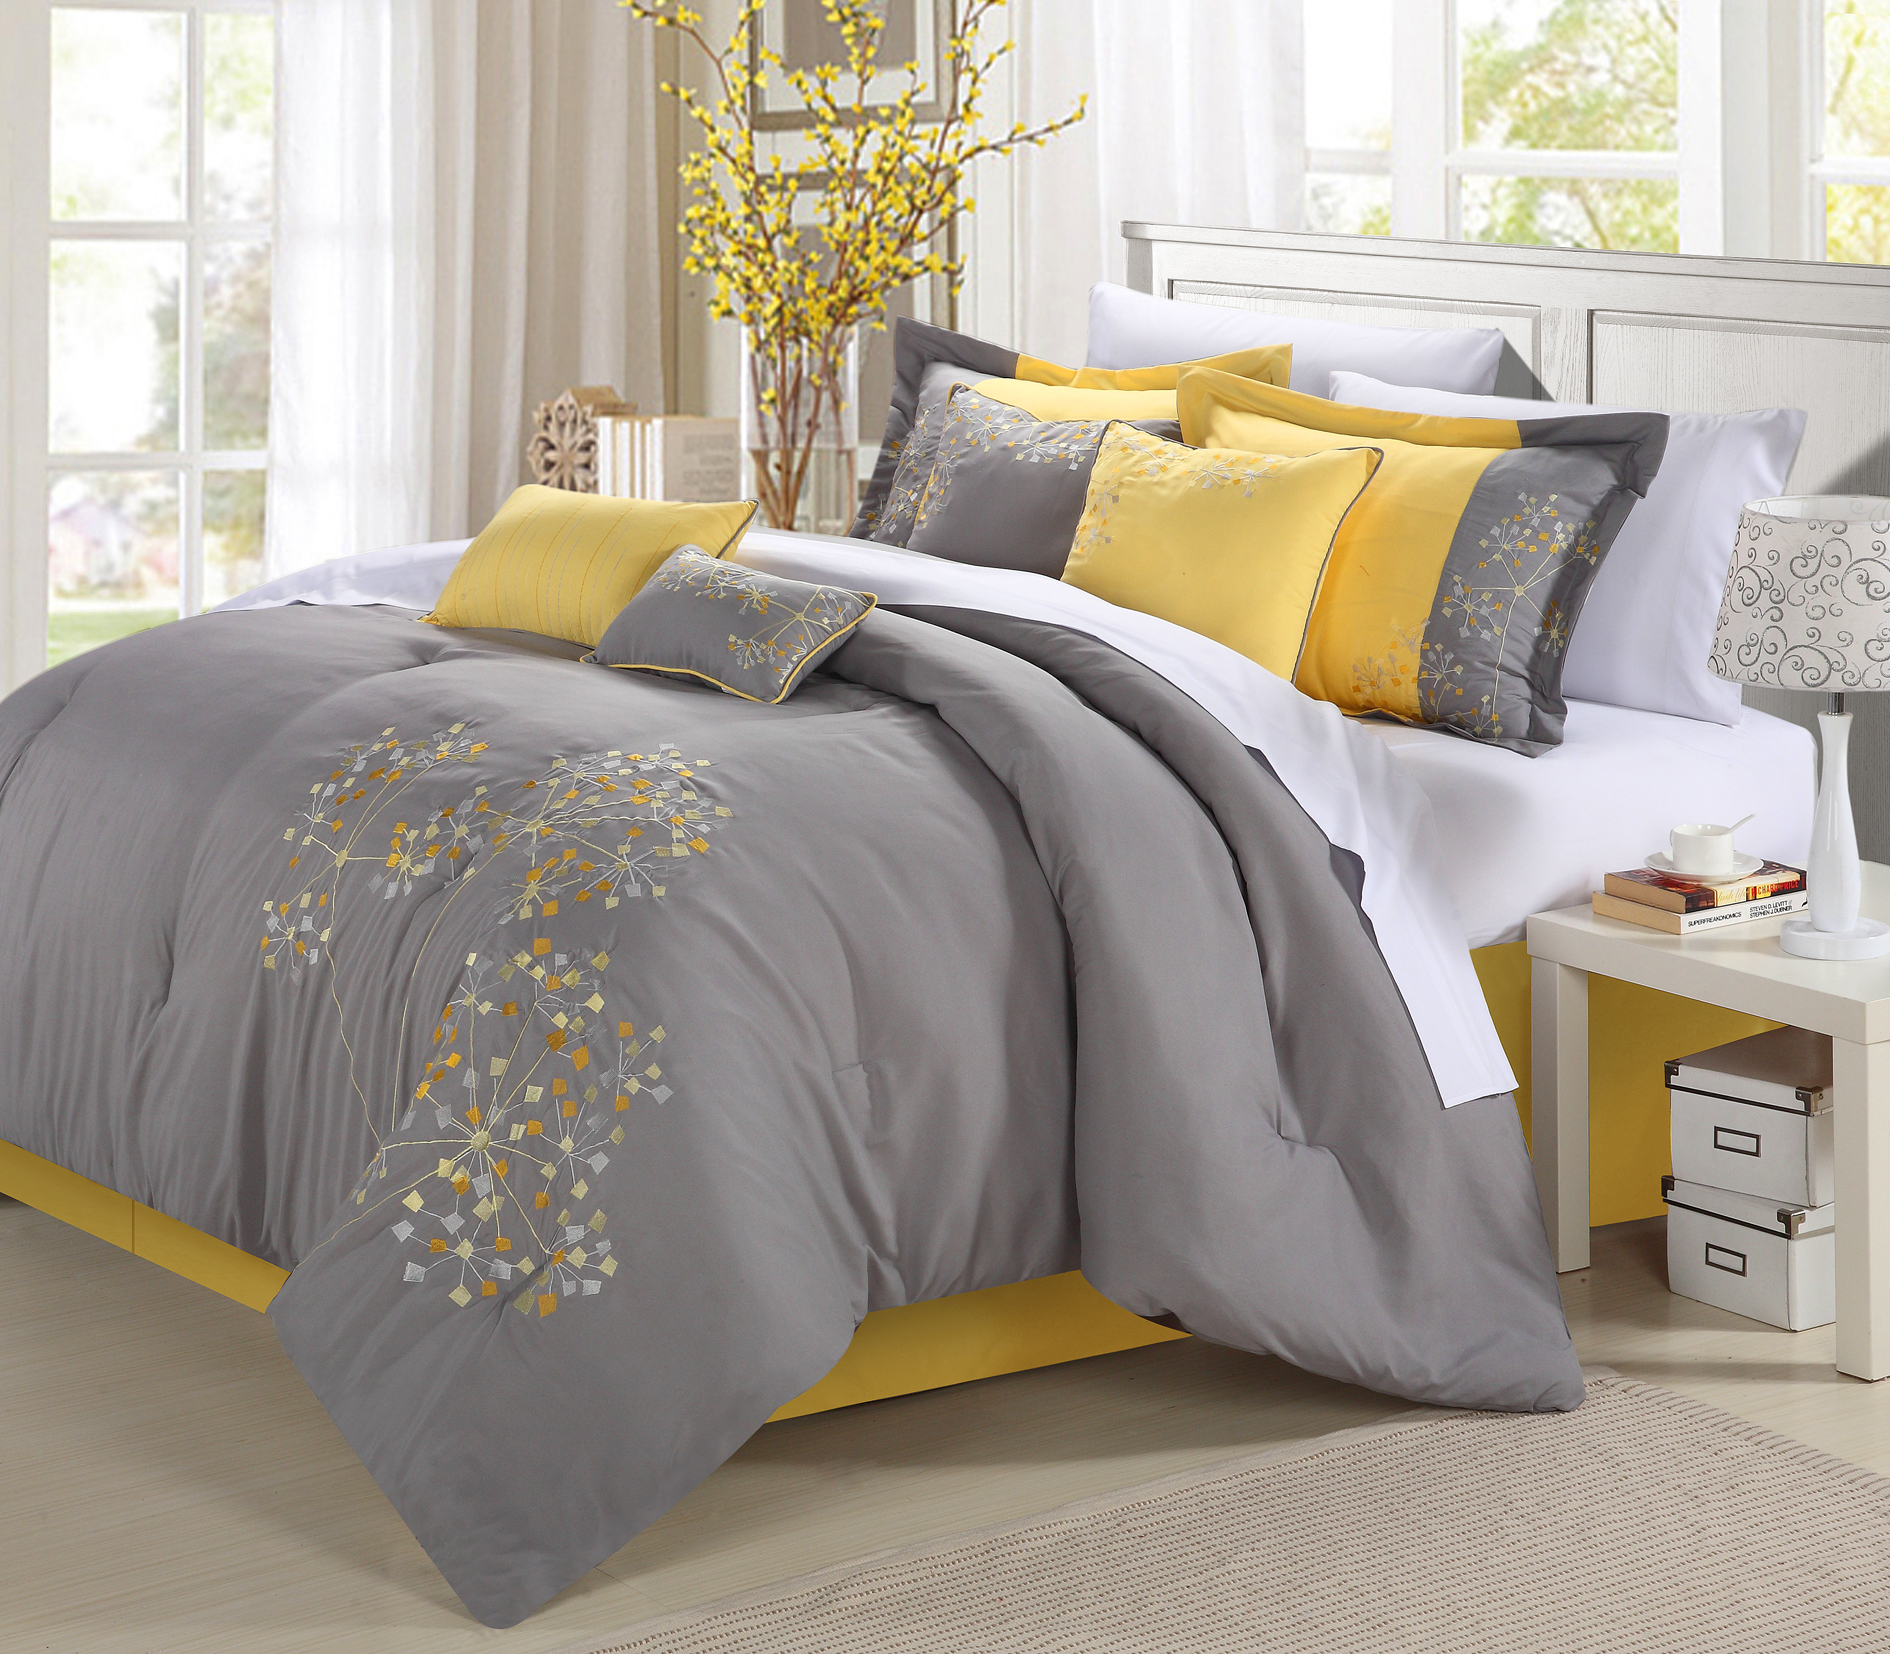 Chic Home Shea 12 Piece Bed in a Bag Comforter Set